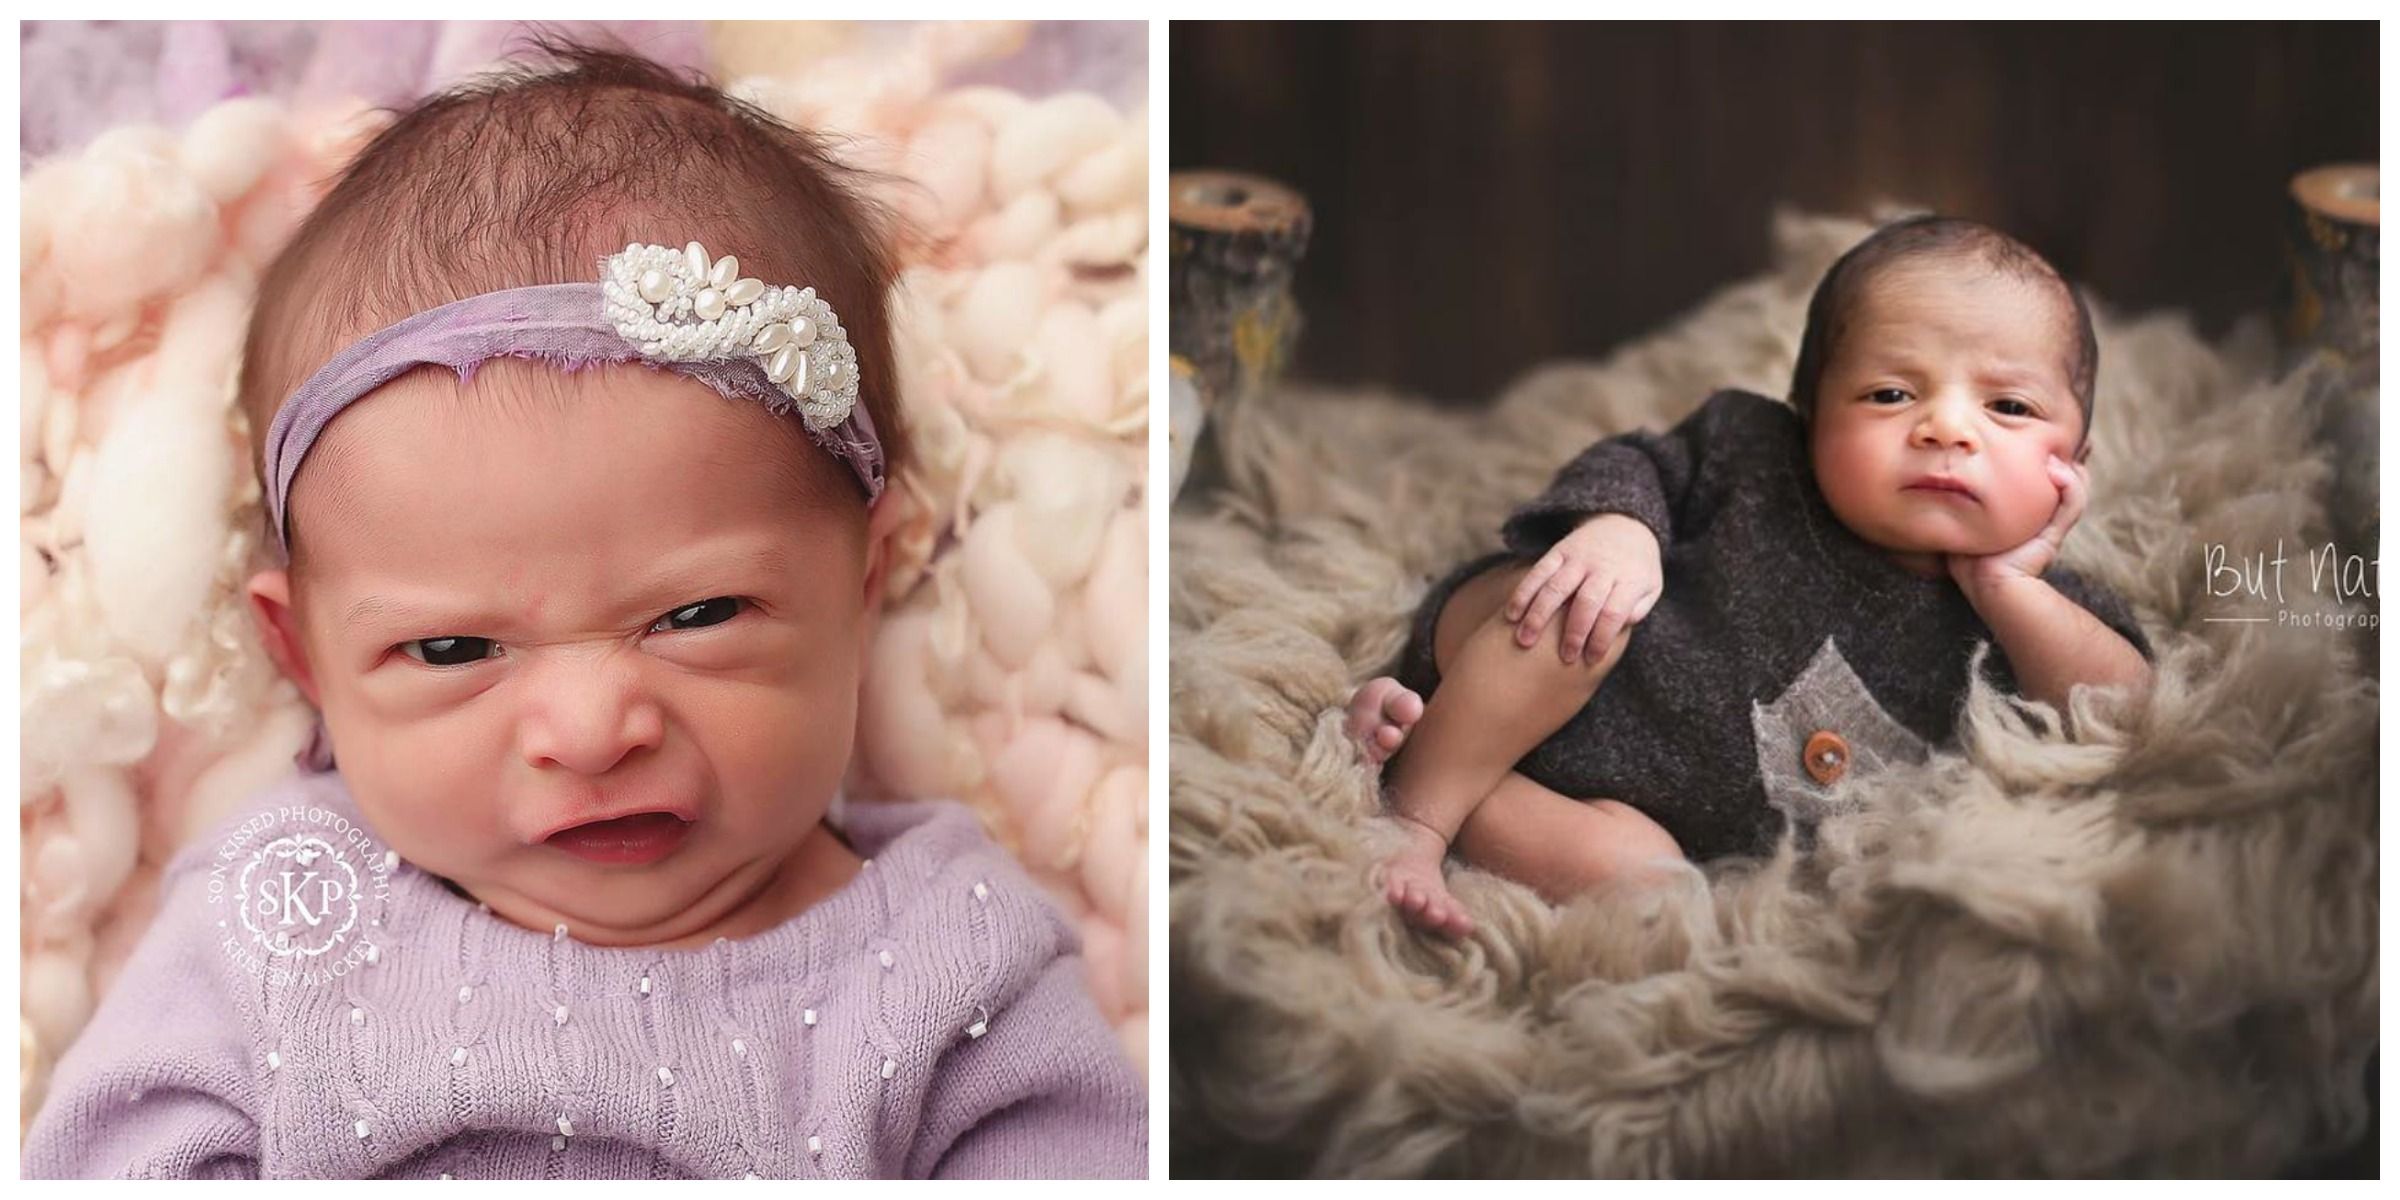 Newborn Photo Shoots Gone Wrong - Funny Baby Photos